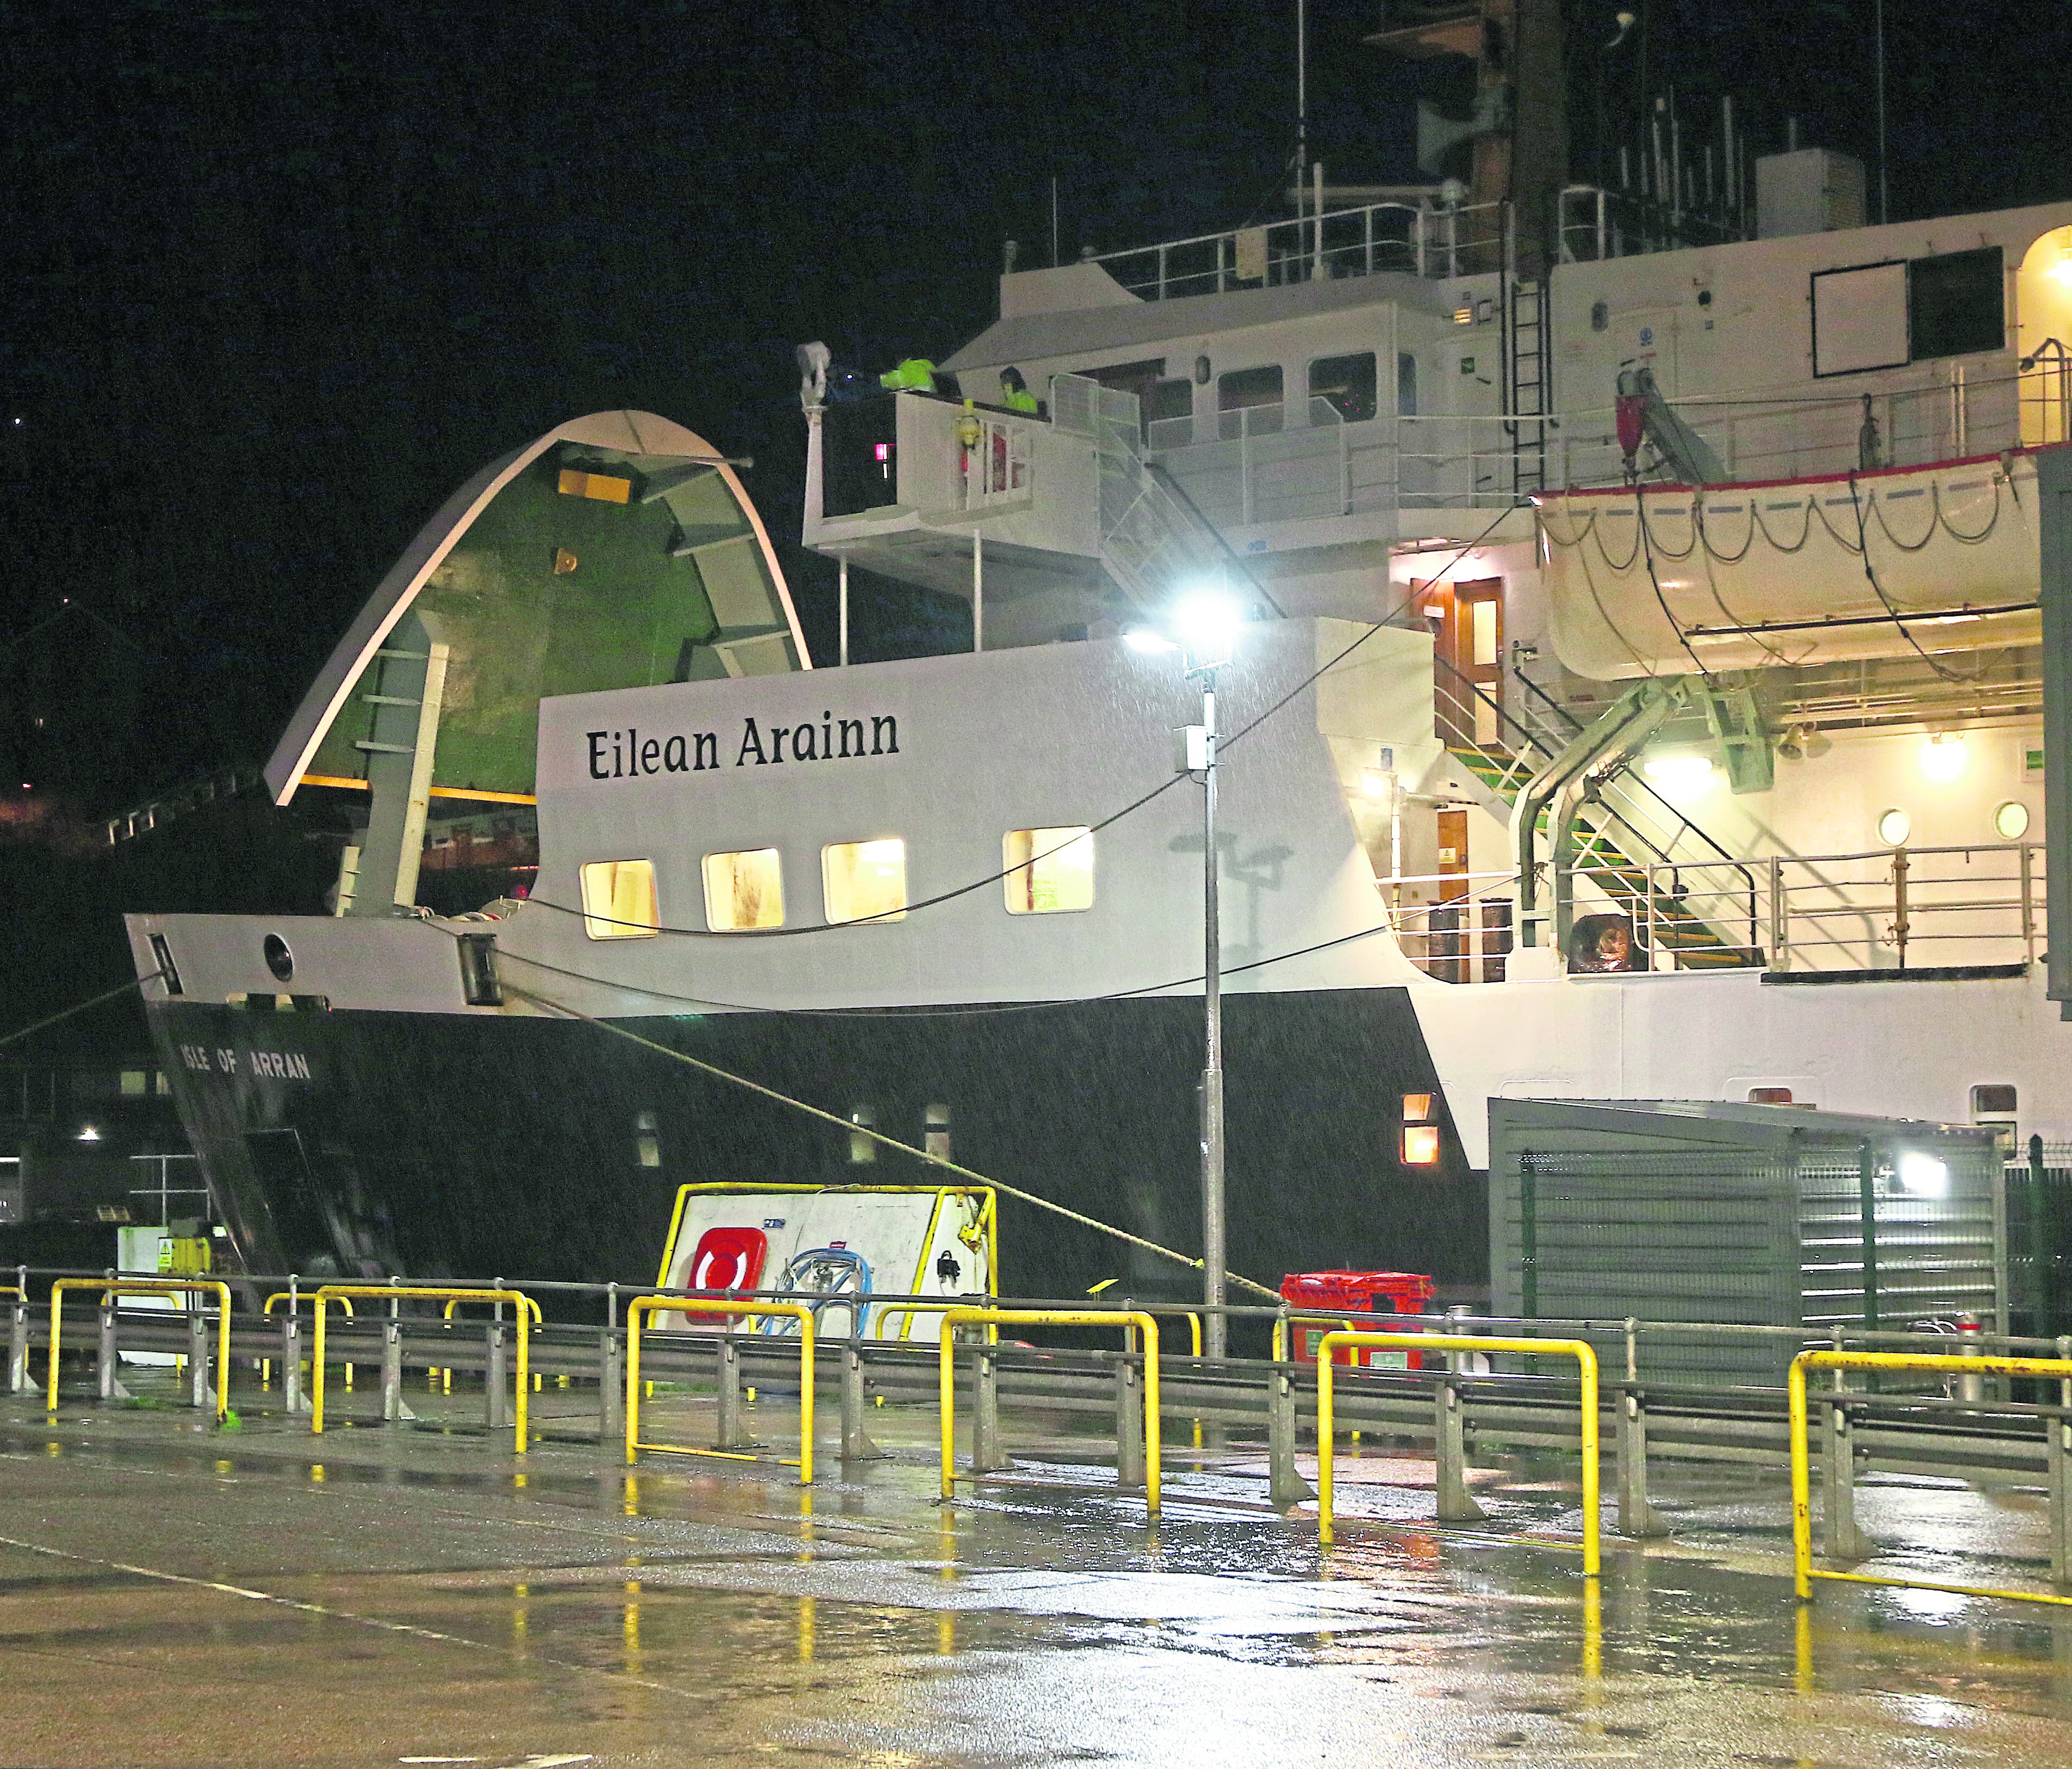 MV Isle of Arran ties up at the linkspan after problems with the bad weather. Picture by Kevin McGlynn.